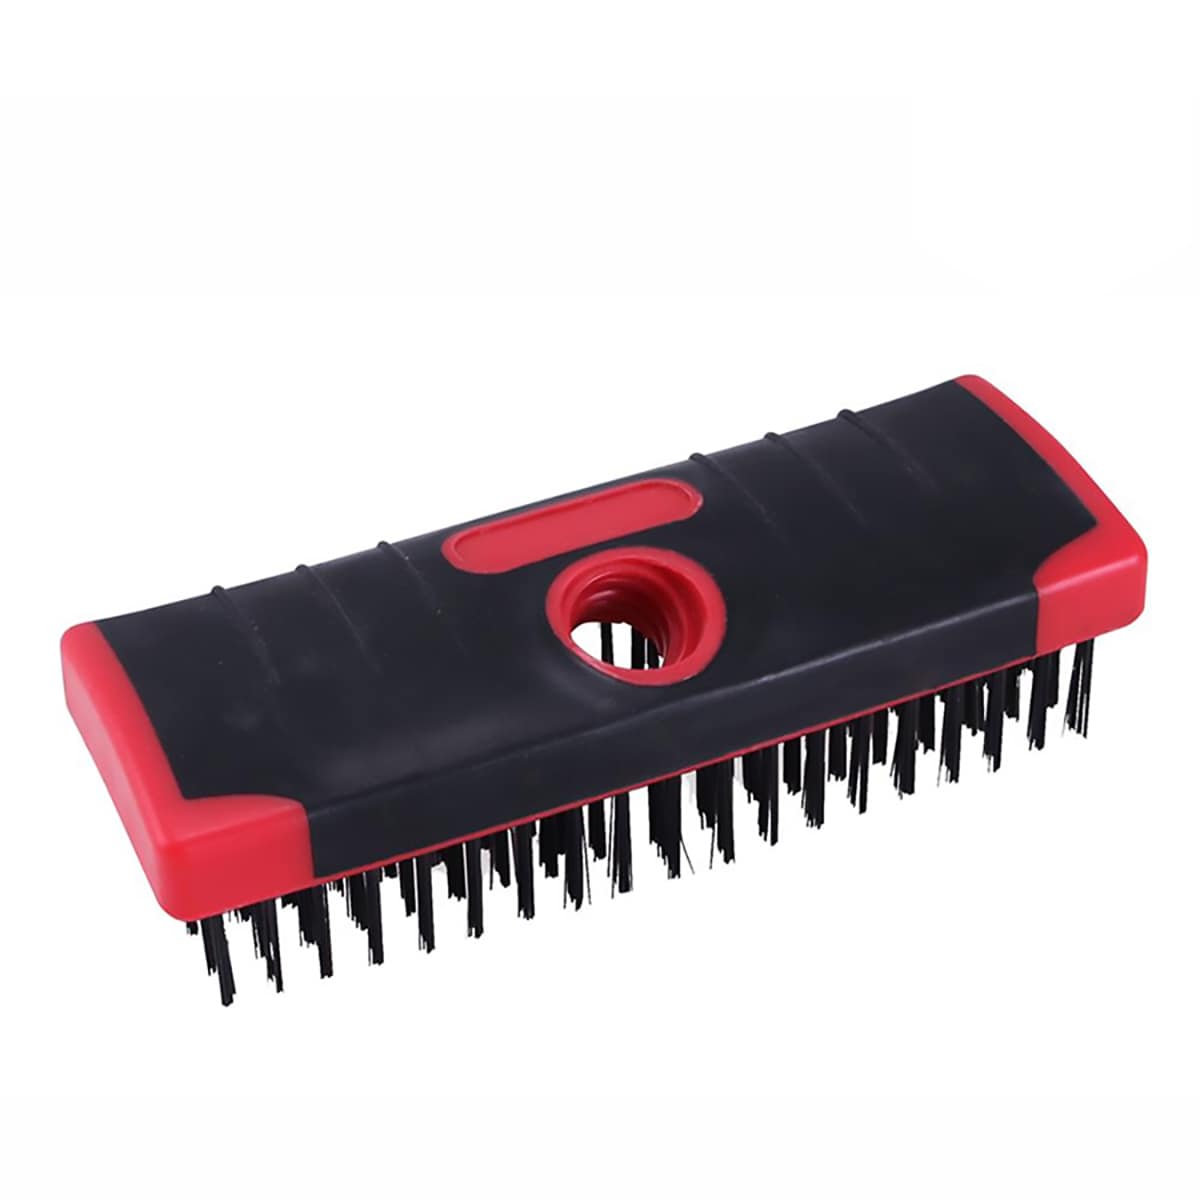 Bon 21-159 Paver Joint Wire Brush with Handle